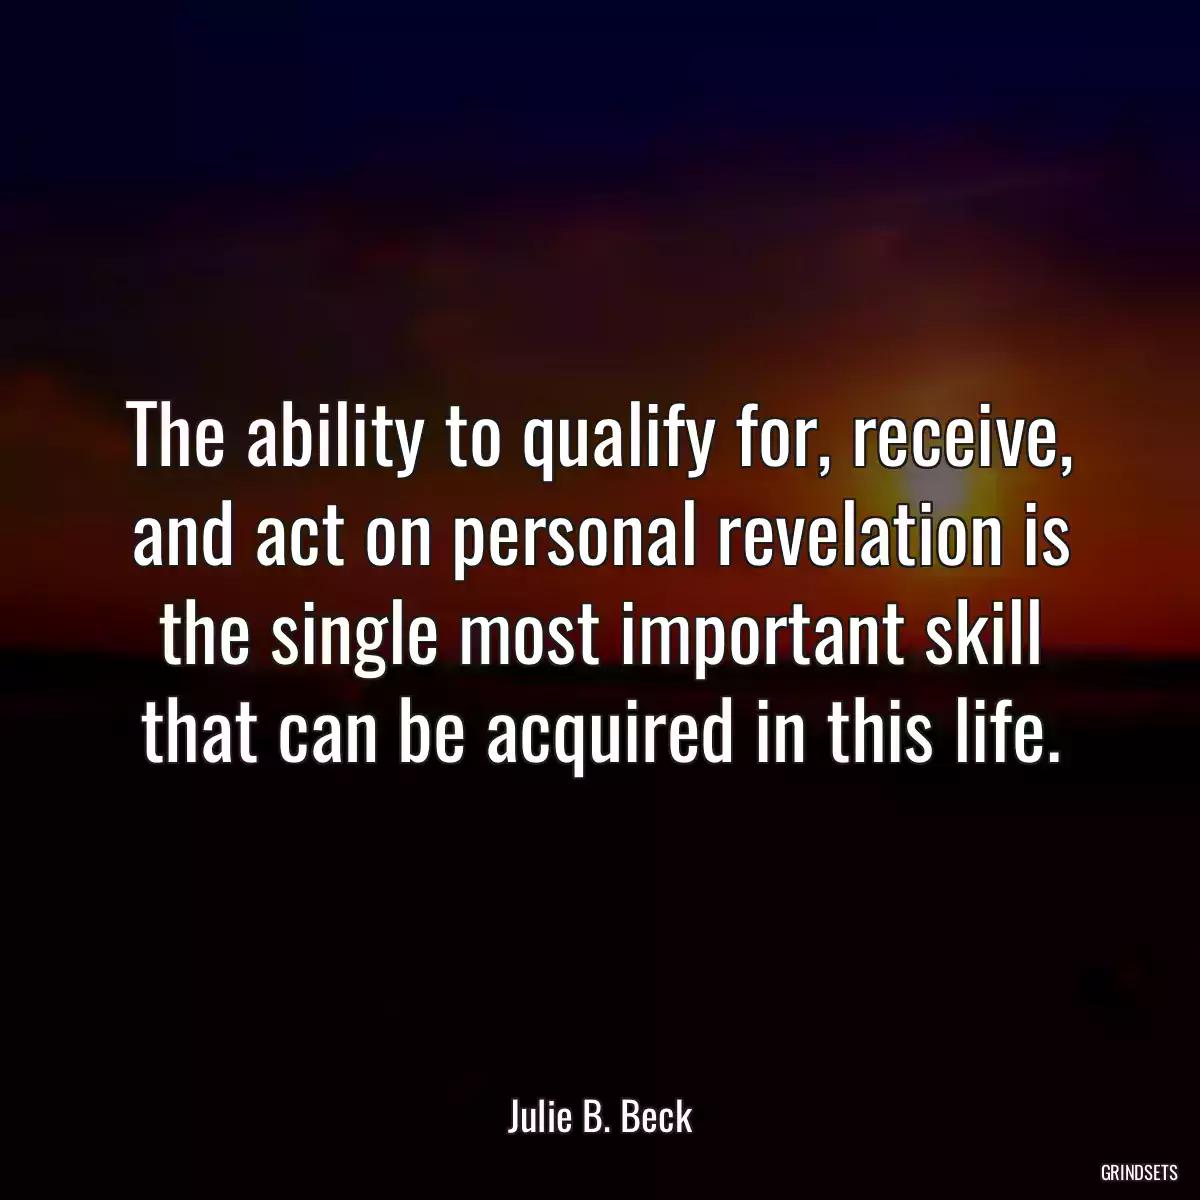 The ability to qualify for, receive, and act on personal revelation is the single most important skill that can be acquired in this life.